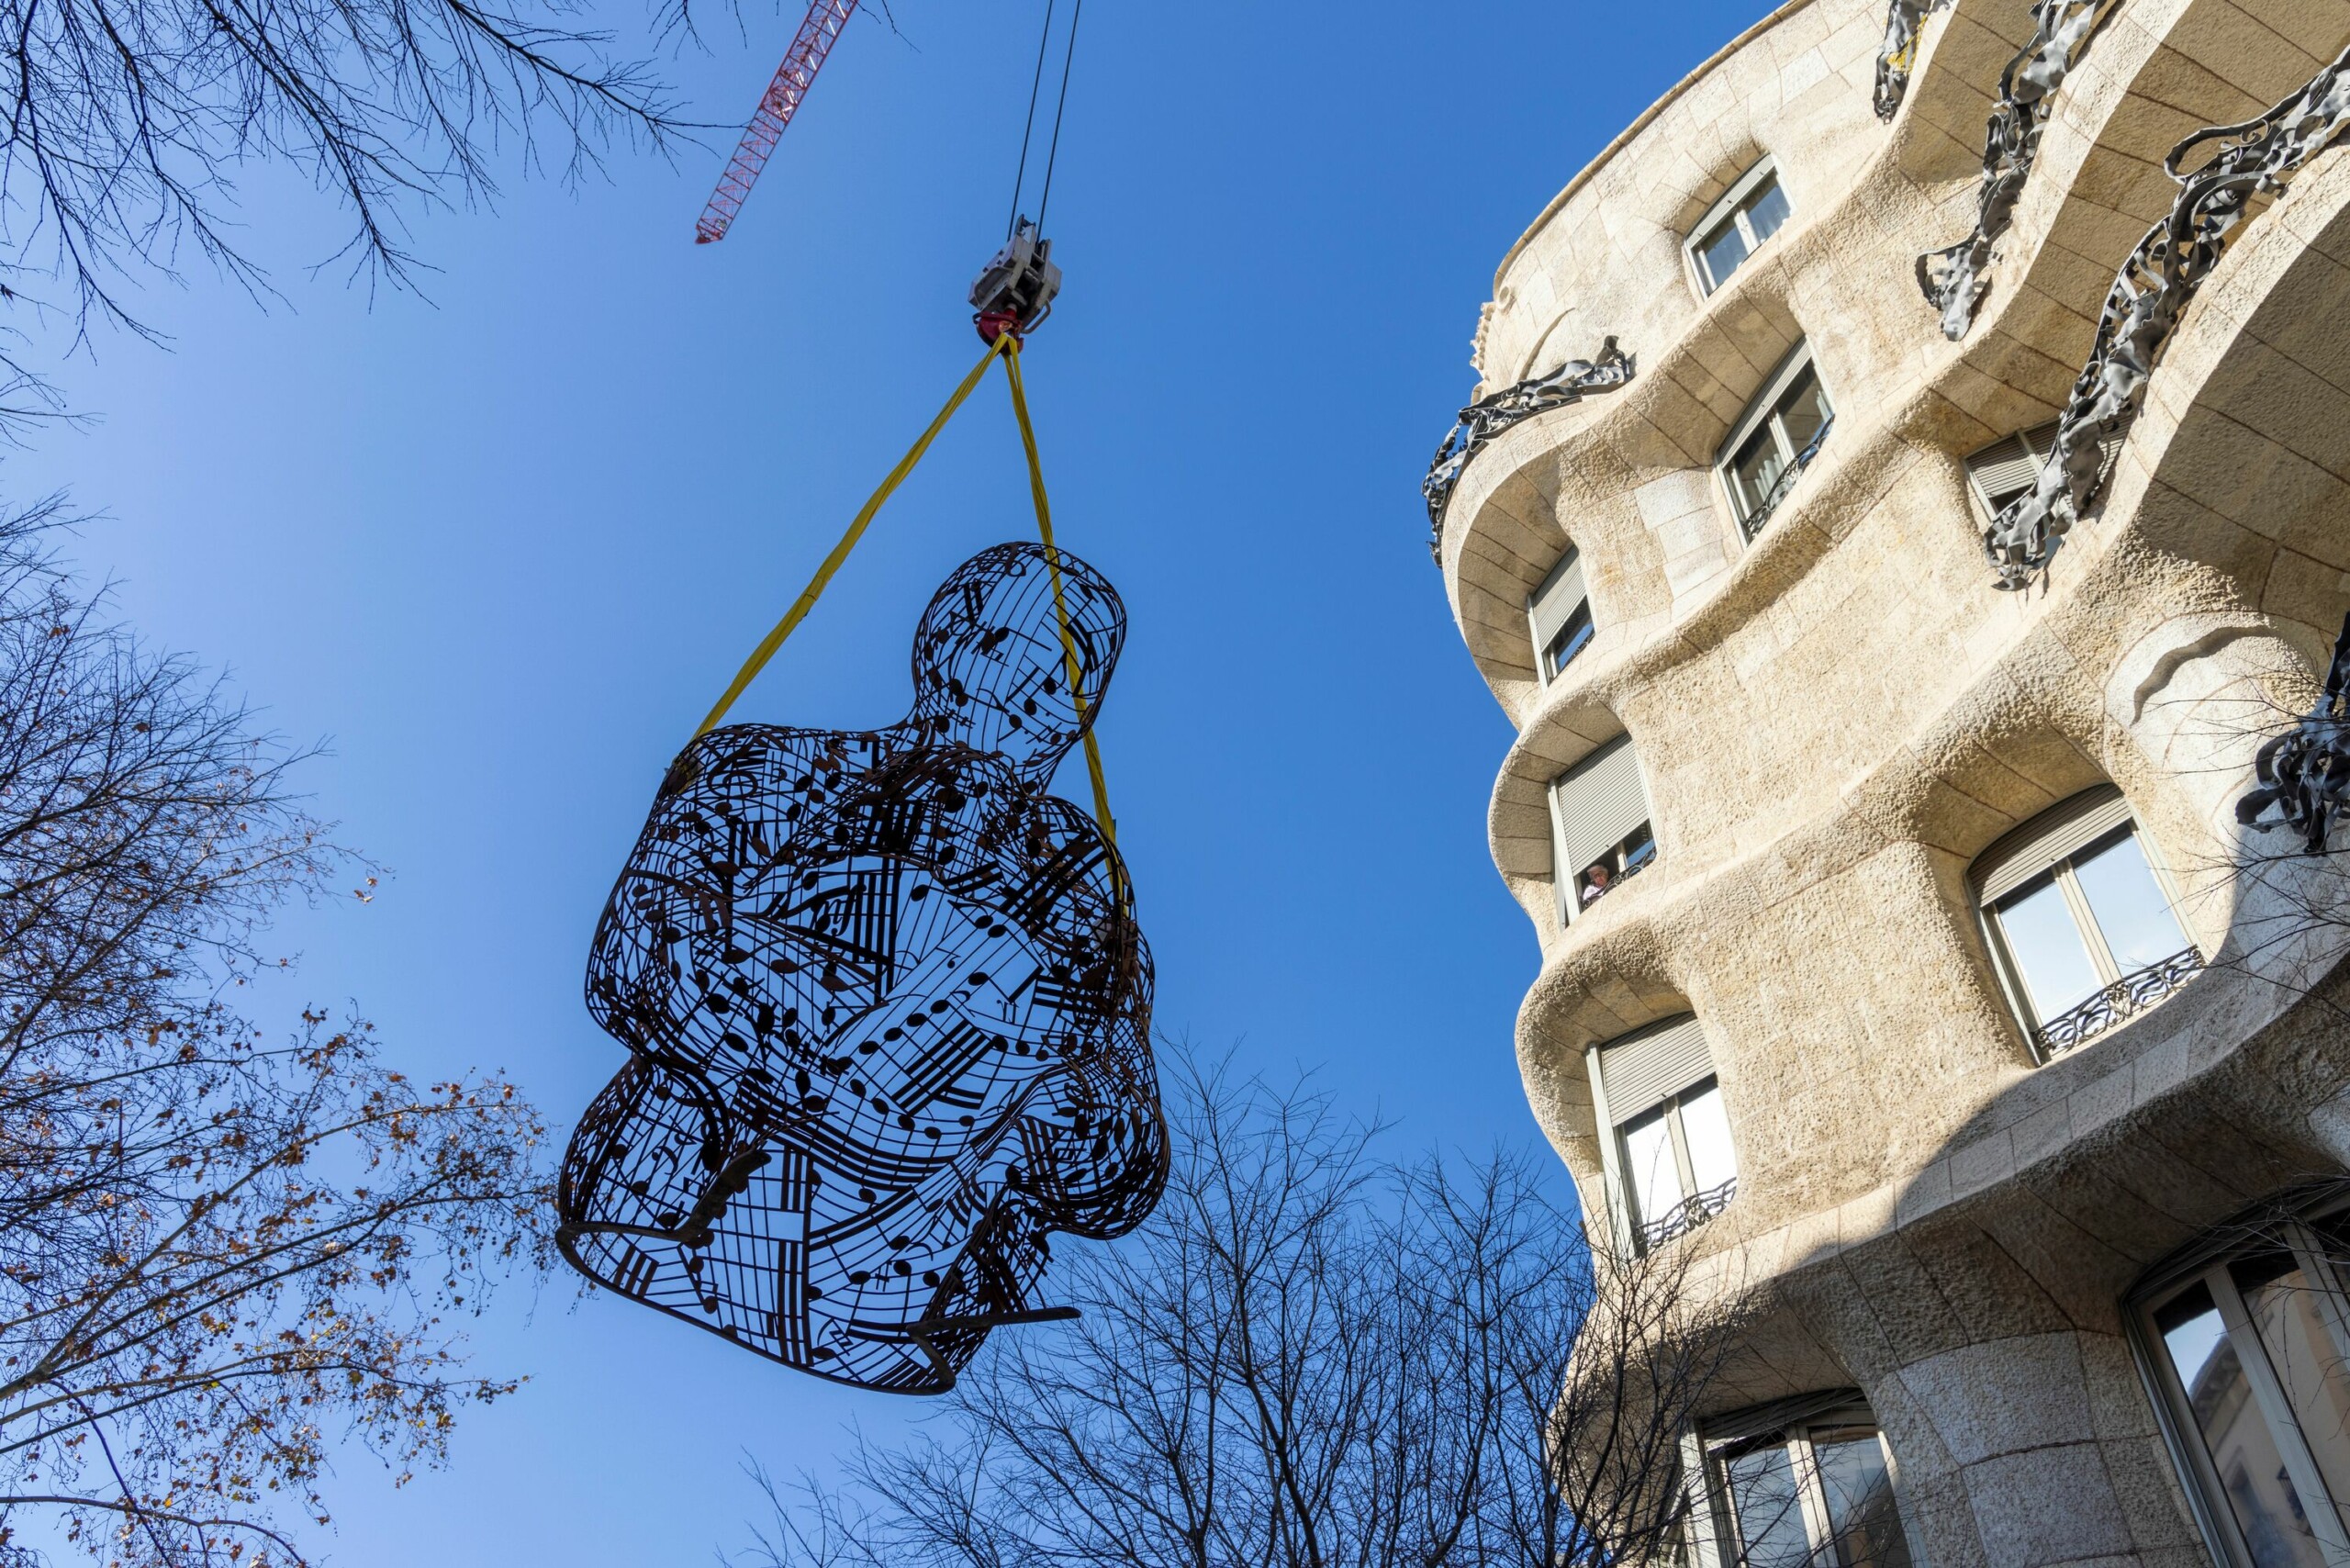 Image of a metal sculpture being lifted by crane to La Pedrera